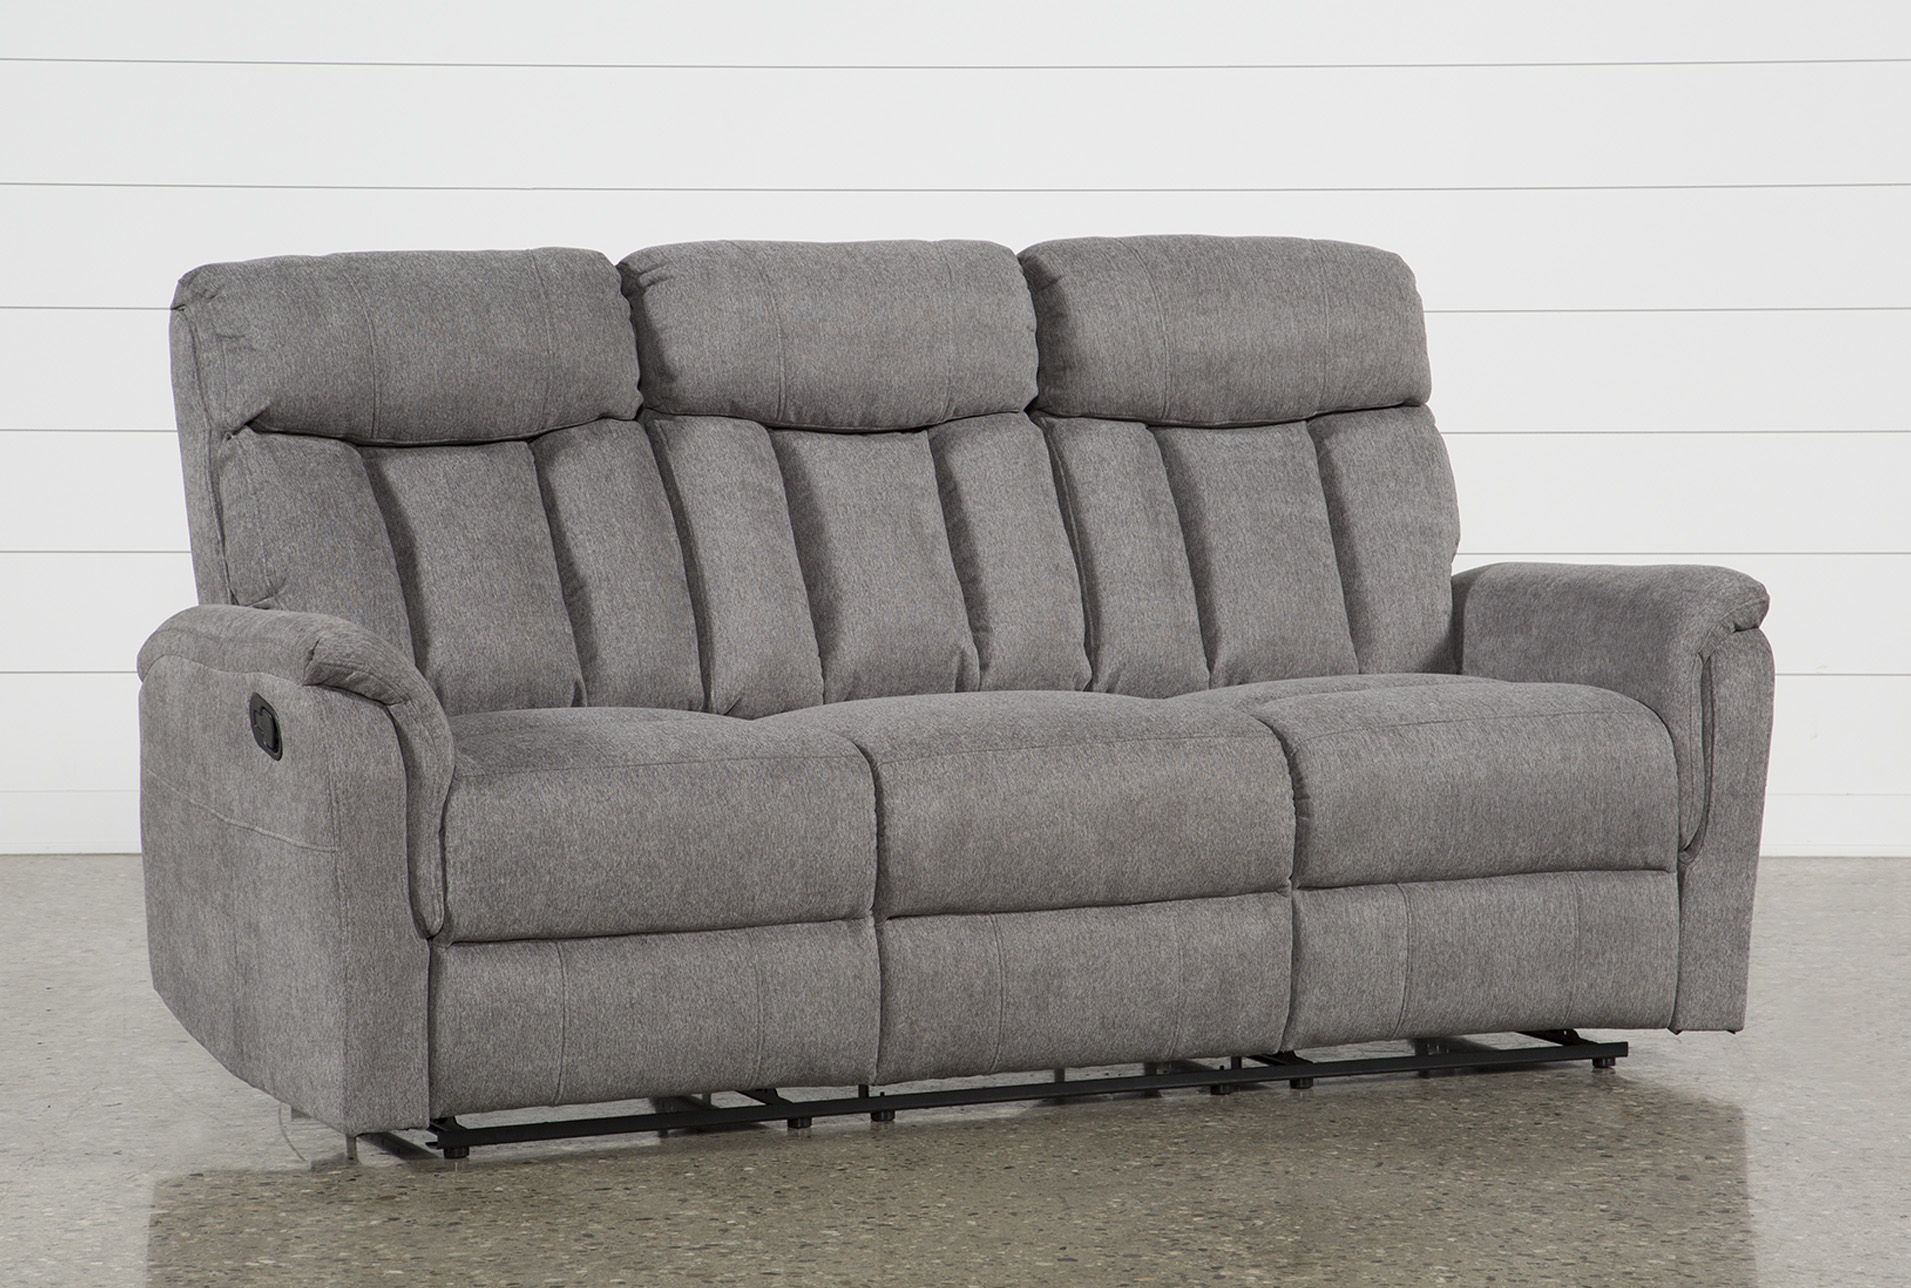 Suzy Dark Grey Reclining Sofa (Qty: 1) has been successfully added to your  Cart.